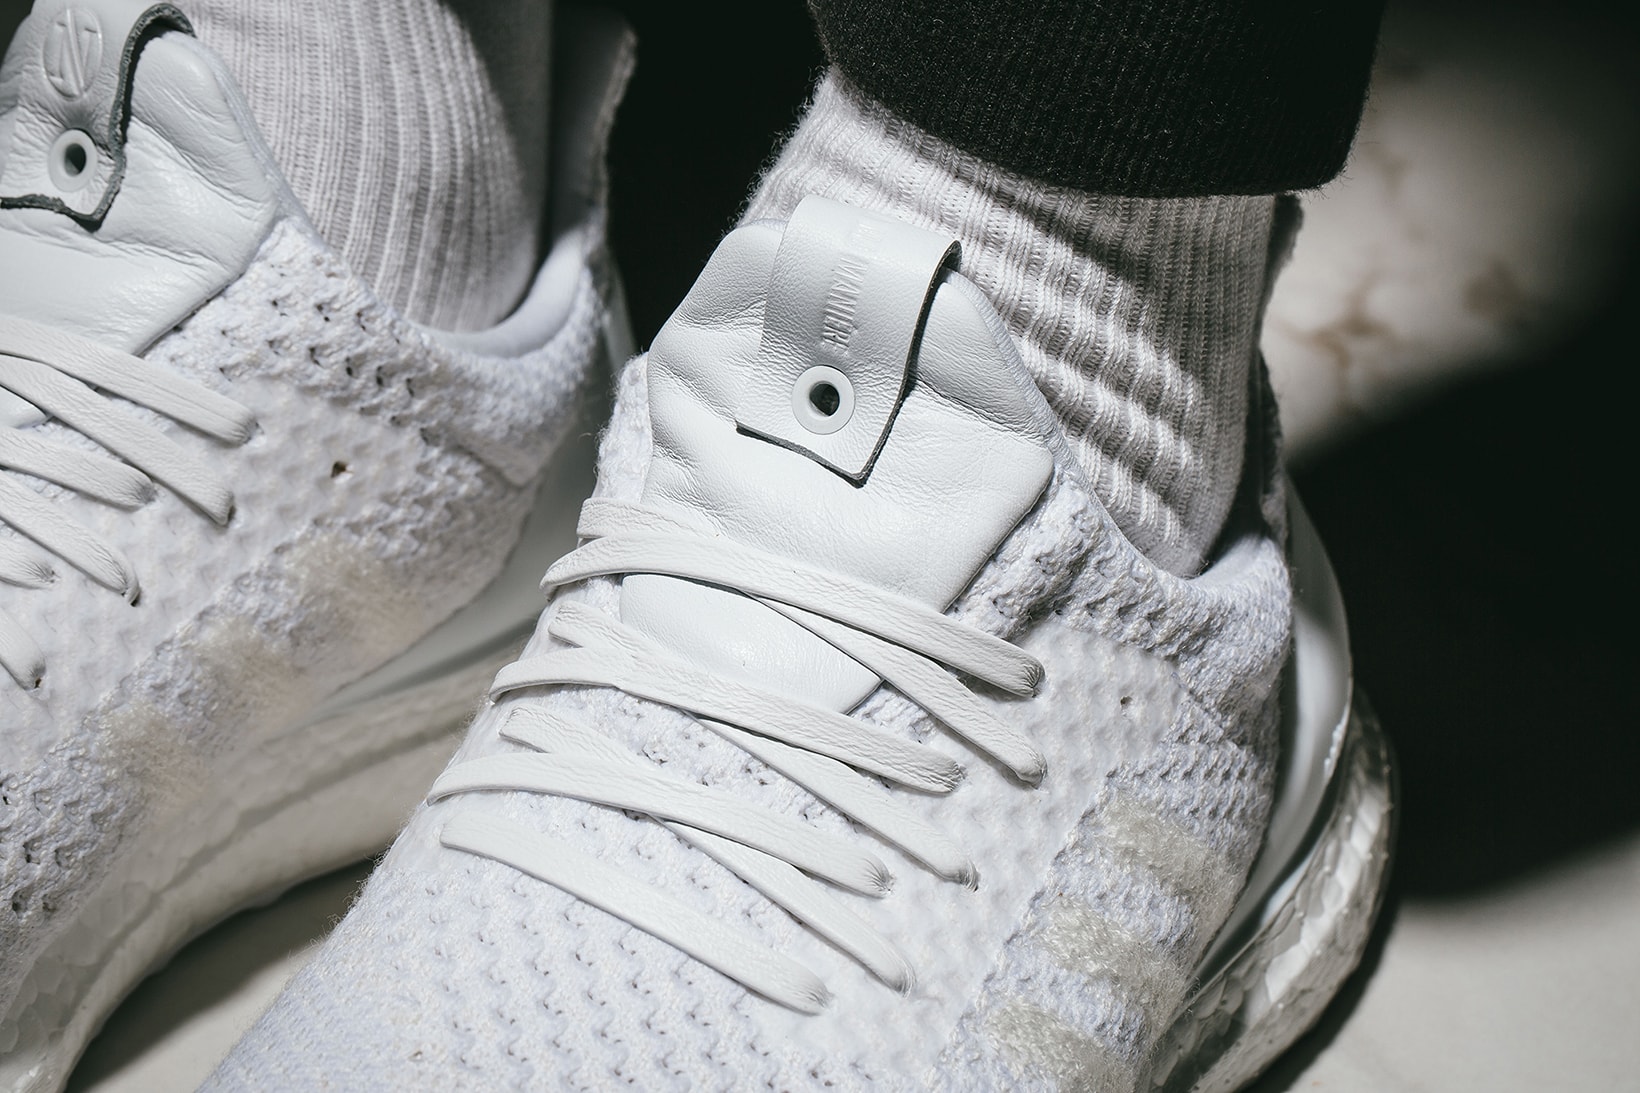 adidas Consortium Sneaker Exchange INVINCIBLE A Ma Maniere On Feet UltraBOOST Ultra BOOST NMD